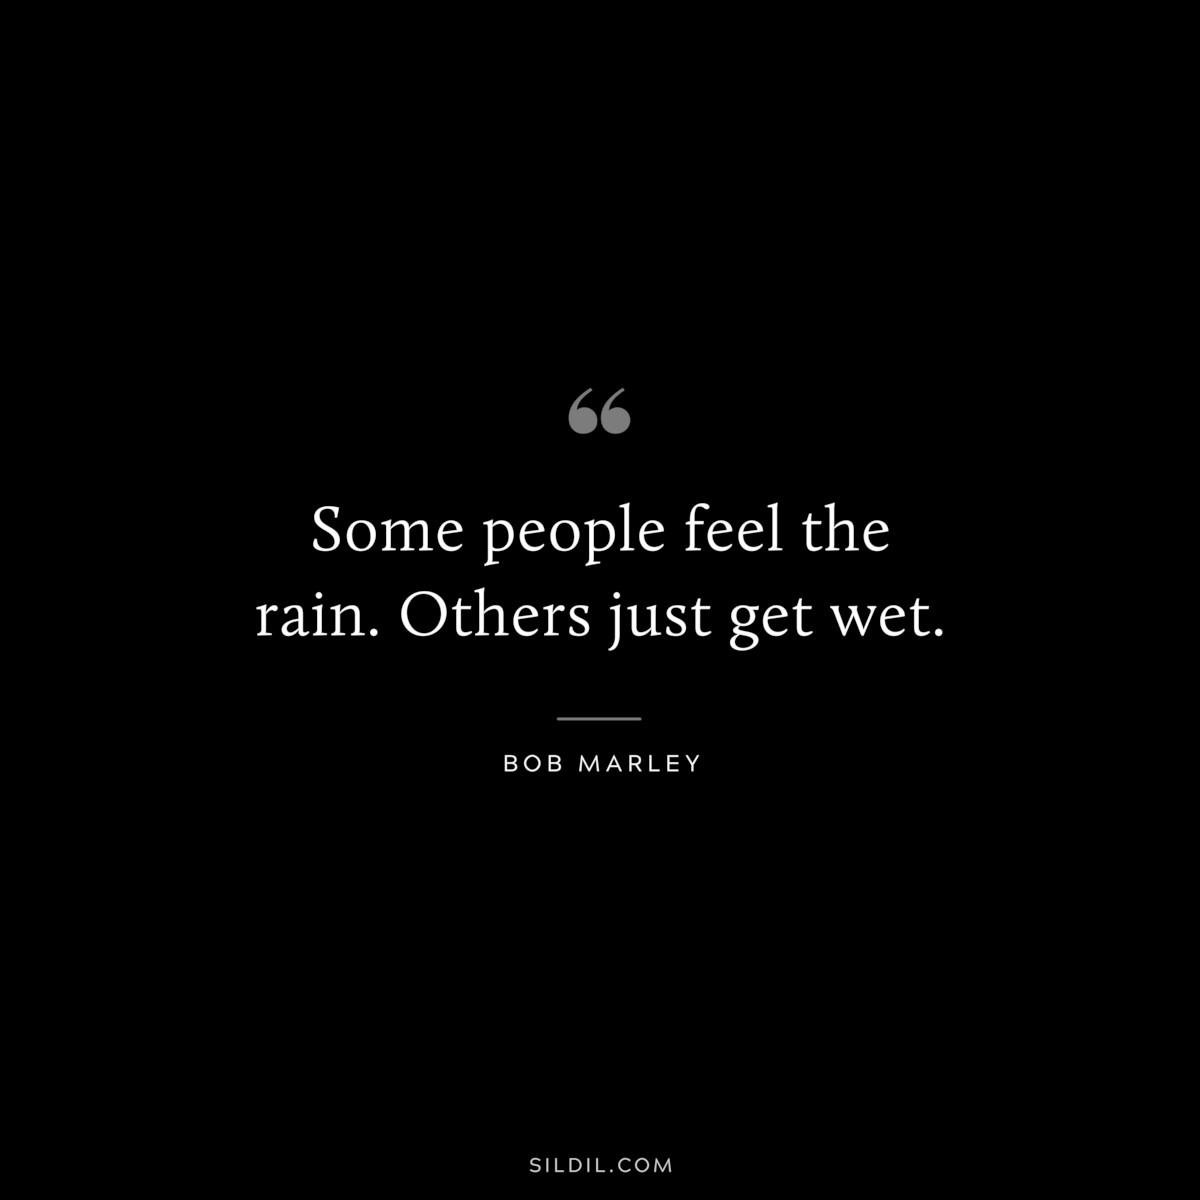 Some people feel the rain. Others just get wet. ― Bob Marley